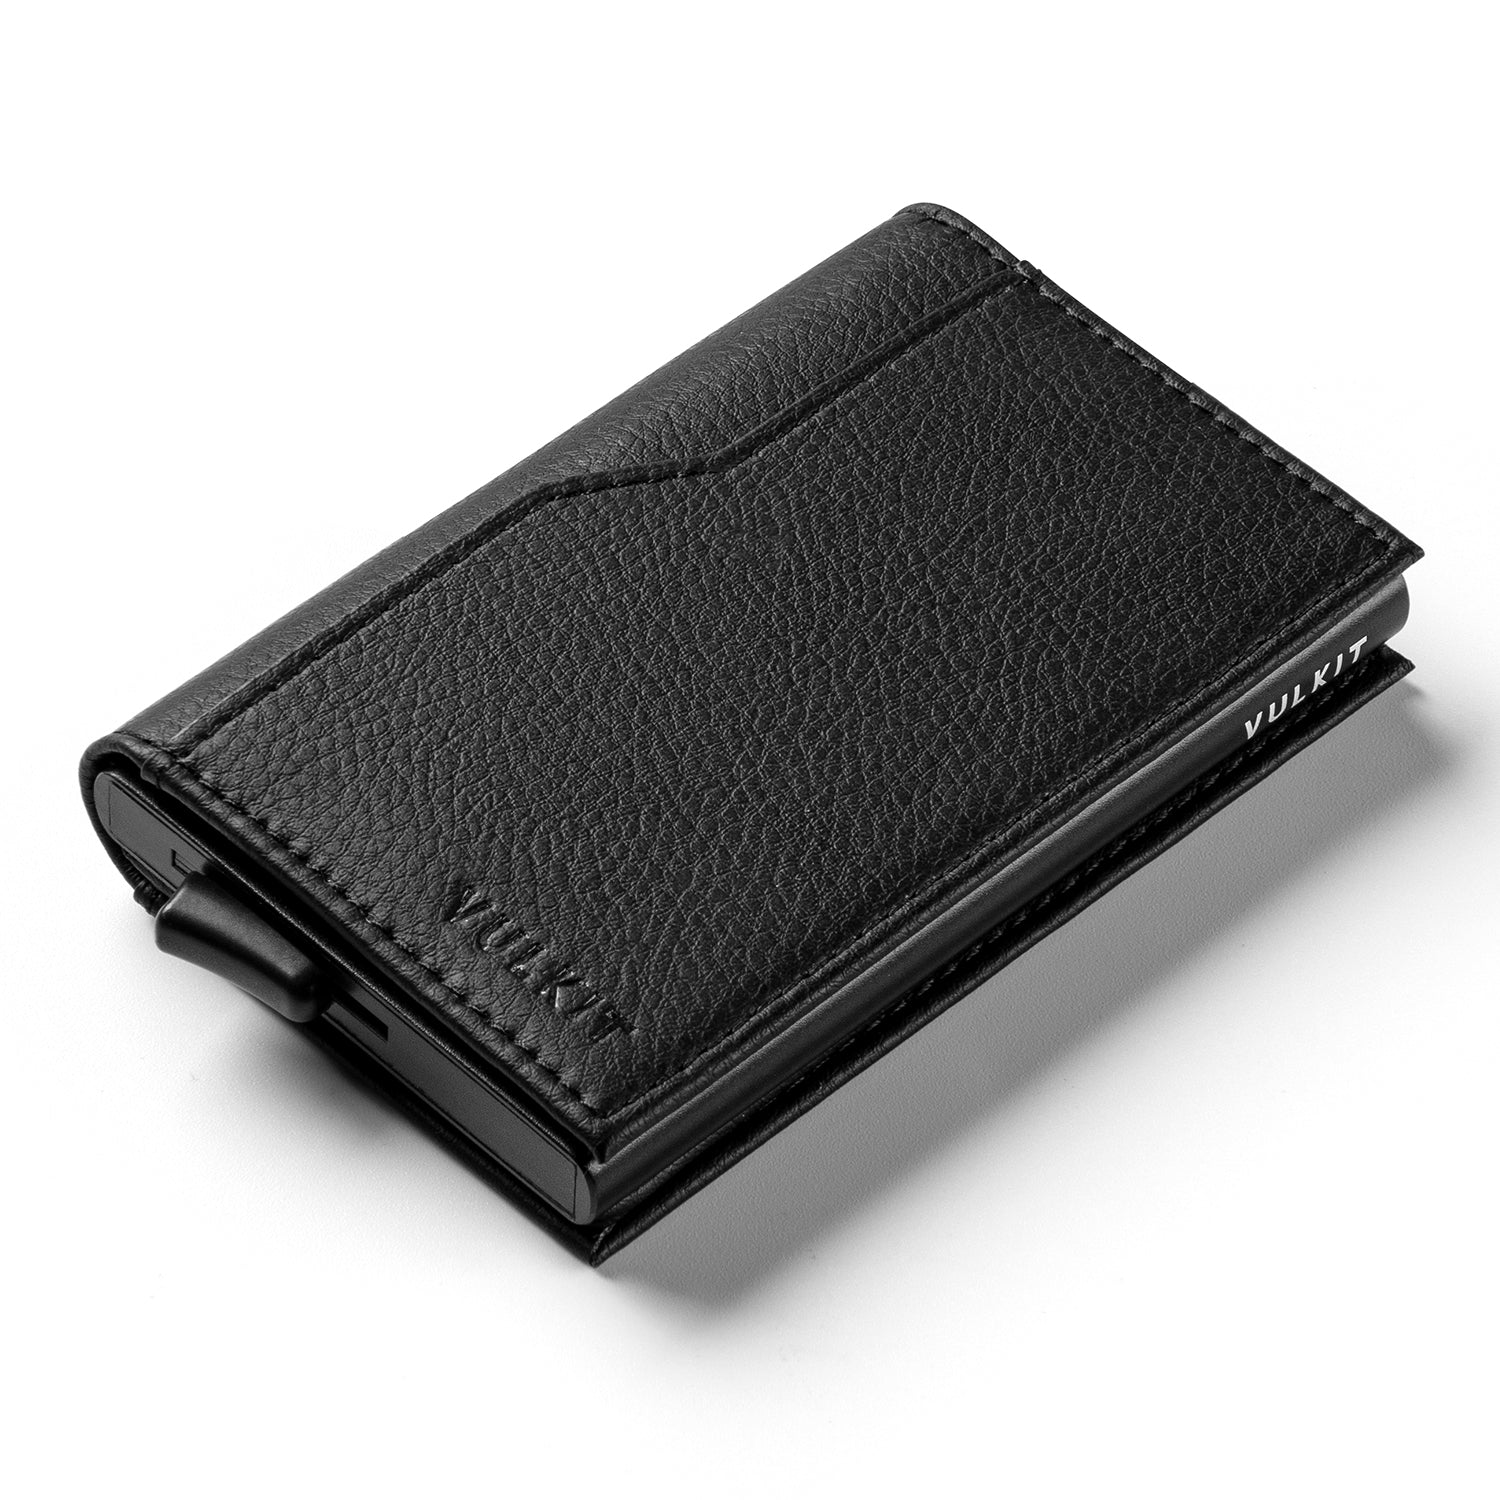 VULKIT Card Holder Wallet with Coin Pocket Magnetic Closure Pop Up Cards  With ID Window Leather Wallet for Cash & Credit Cards, Grain Black